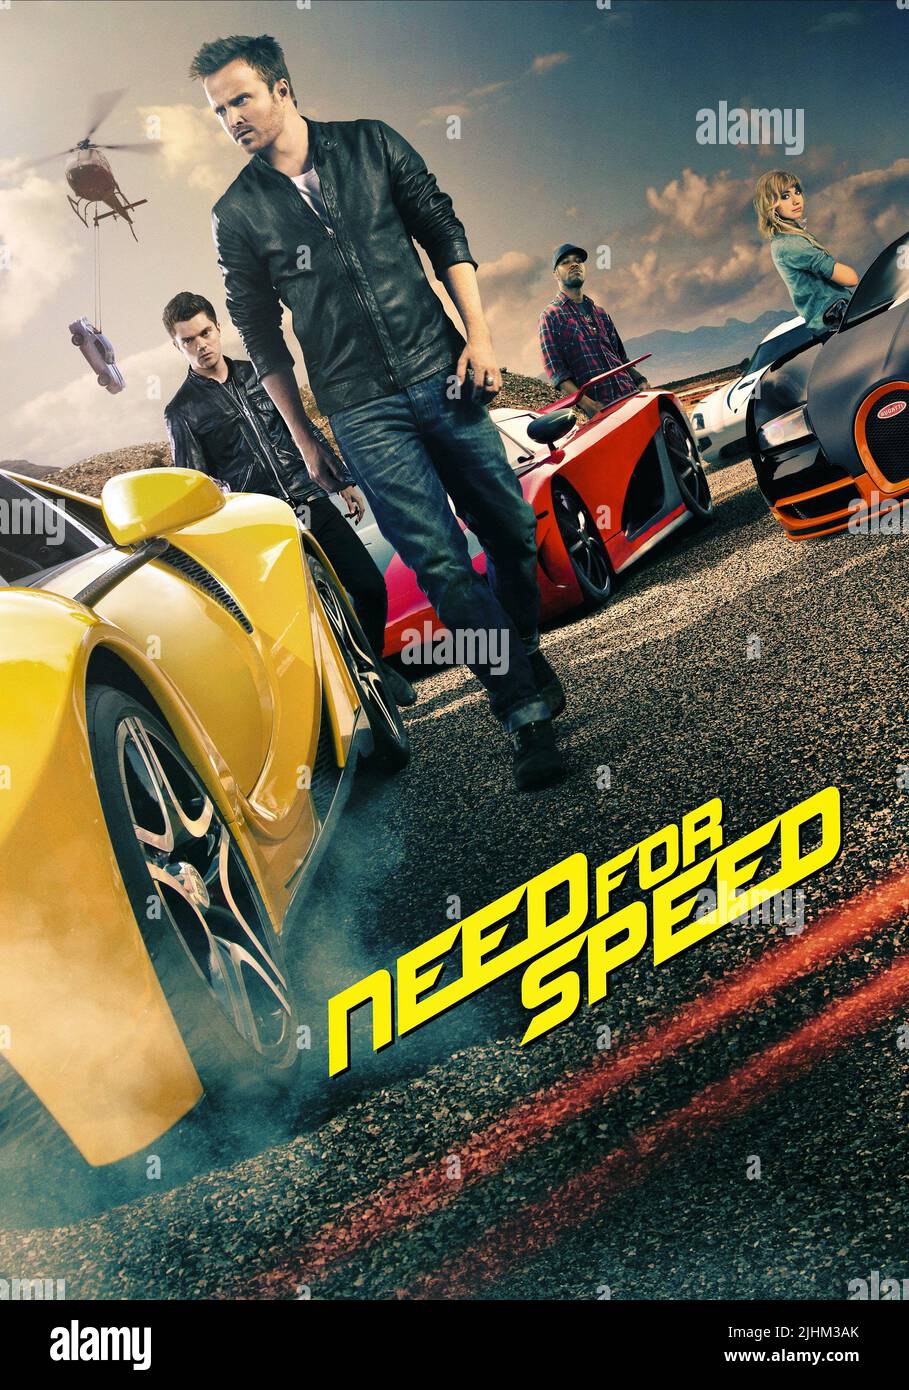 10+ Need For Speed Stock Videos and Royalty-Free Footage - iStock